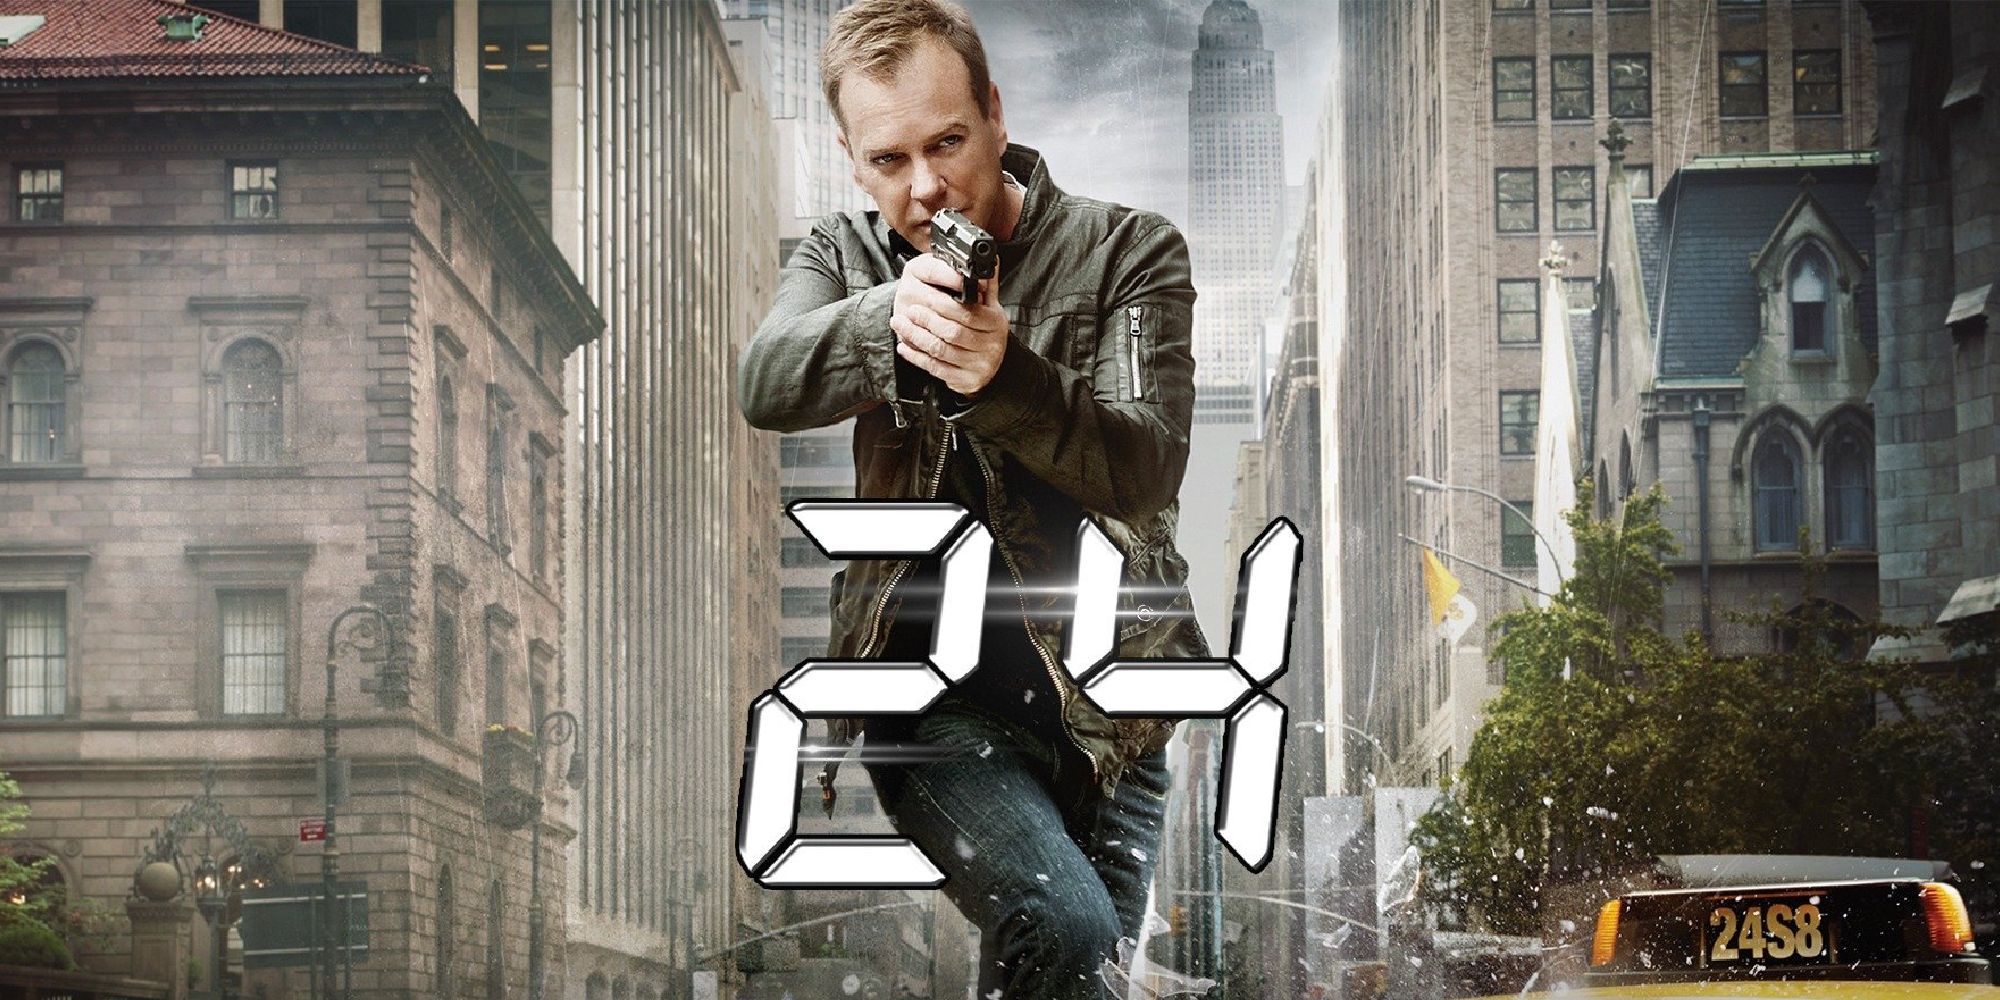 Kiefer Sutherland as Jack Bauer in a promotion image for the eigth season of 24.